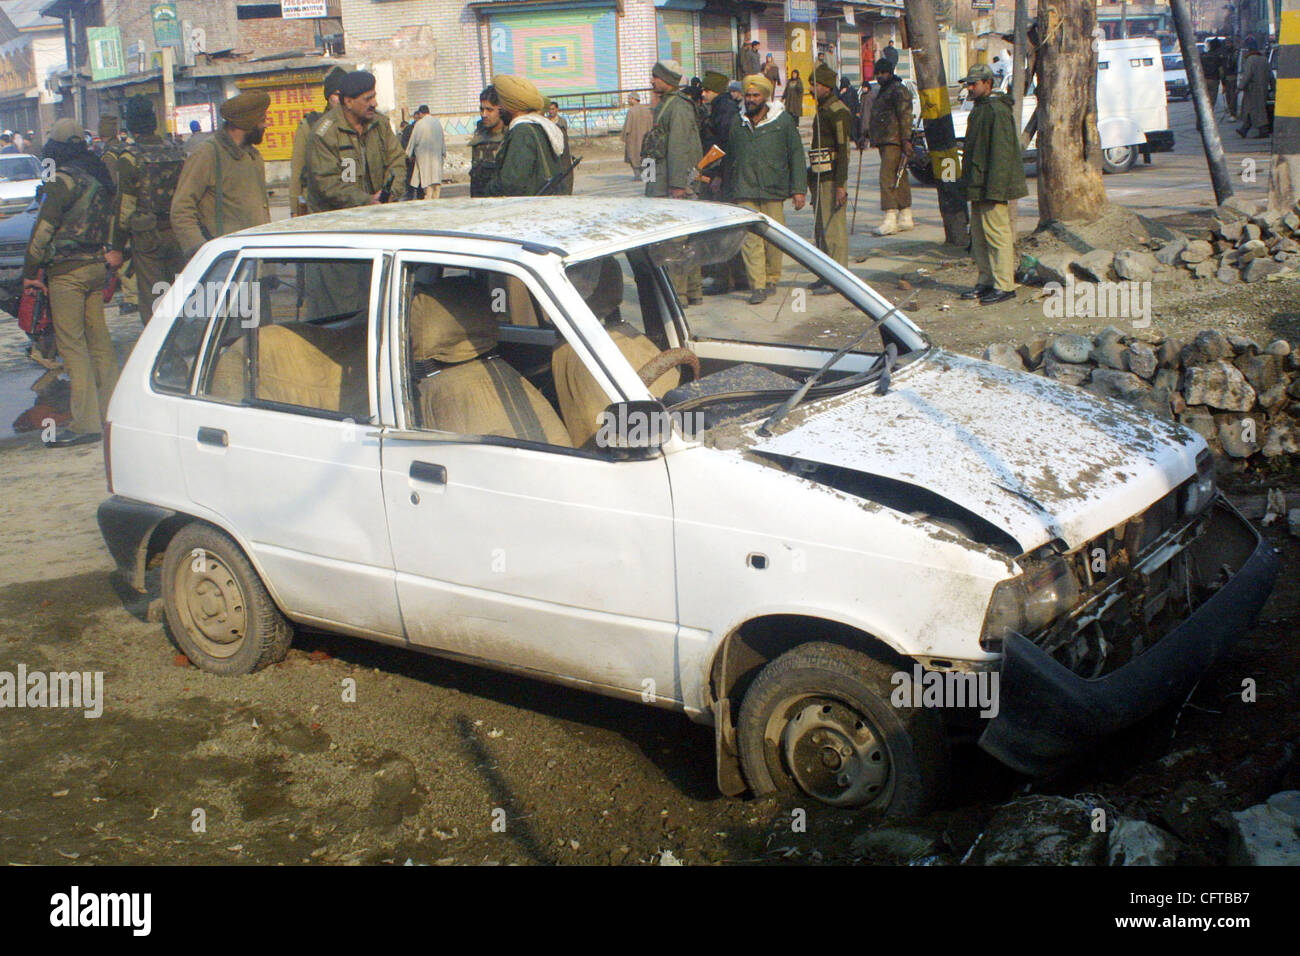 Indian security forces stand near a damaged car following an explosion in downtown area of Srinagar, the summer capital of Indian Kashmir, Friday, 29 December 2006. Shabir Hussain Khan, a Kashmiri civilian, who was riding a motorcycle, was killed on the spot when the Improvised Explosive Device (IED Stock Photo